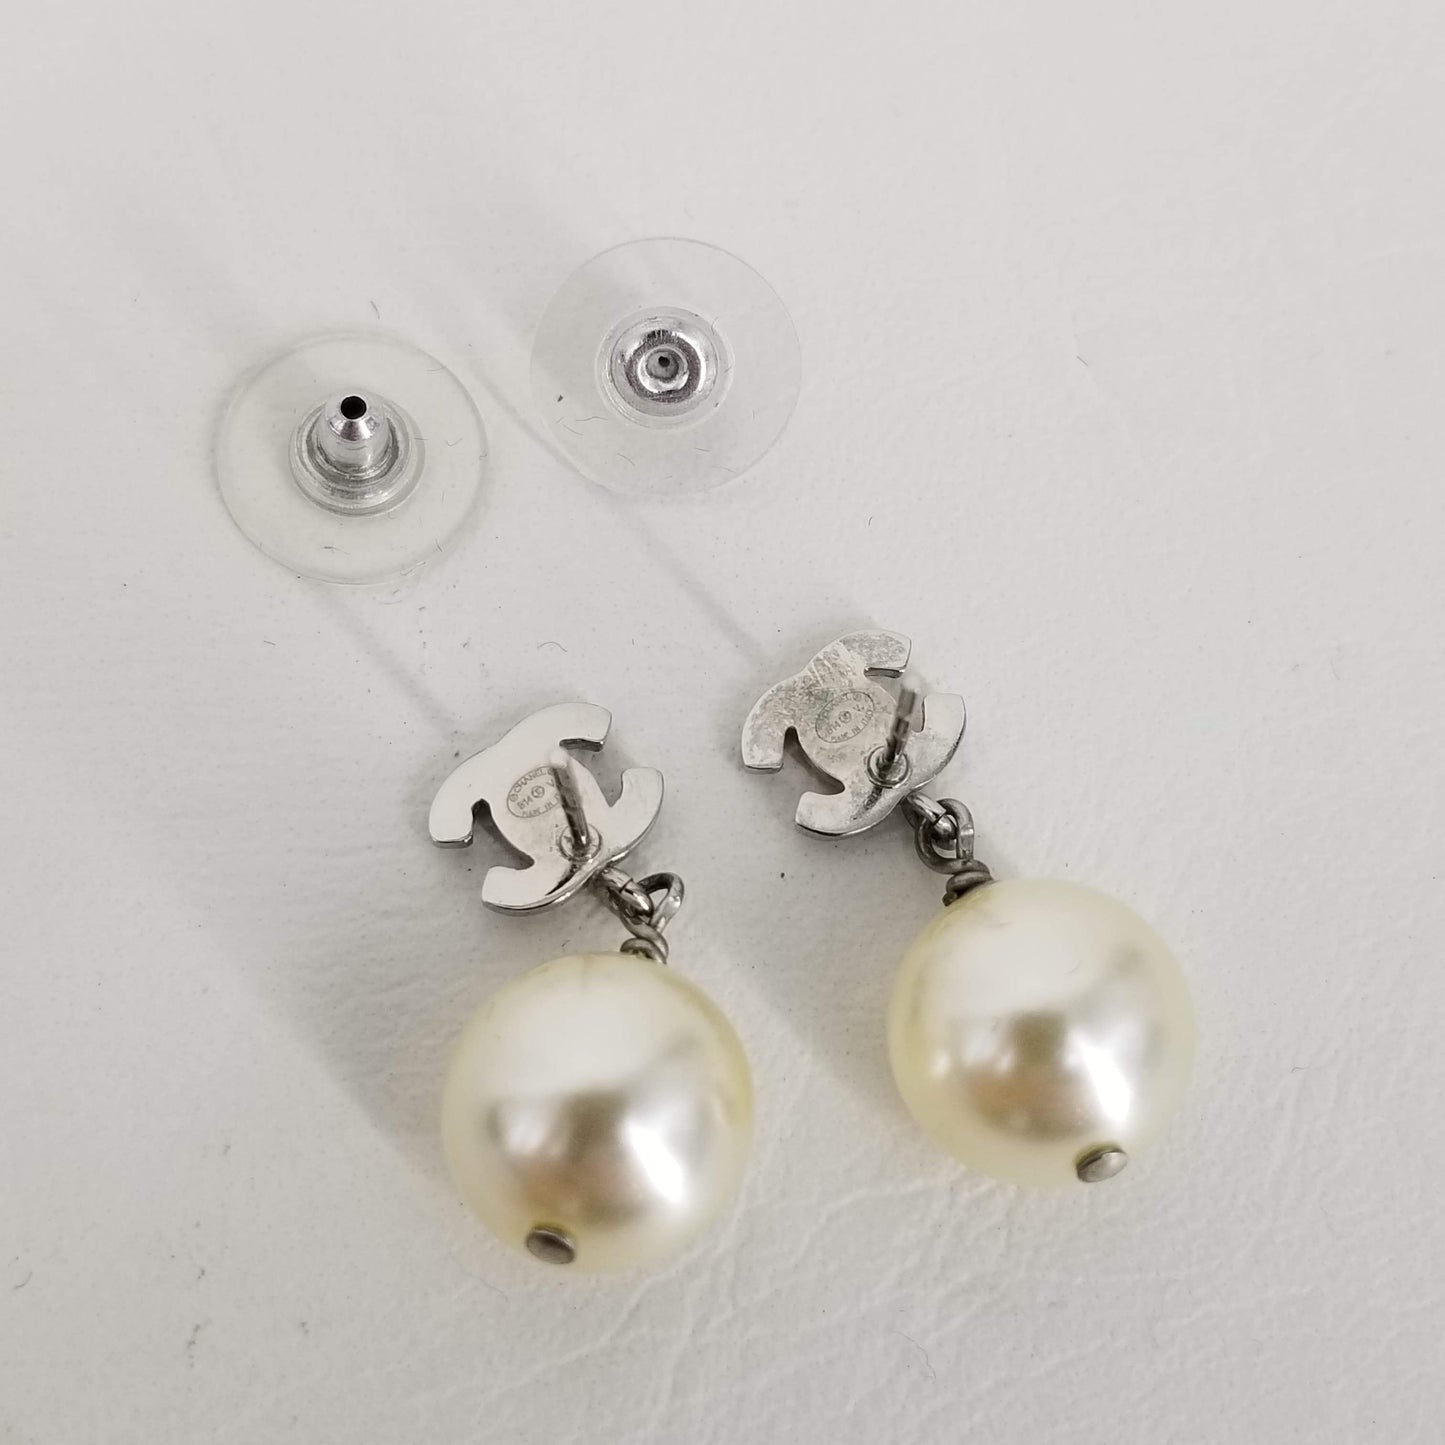 Authentic Chanel Crystal Pearl Drop Earrings